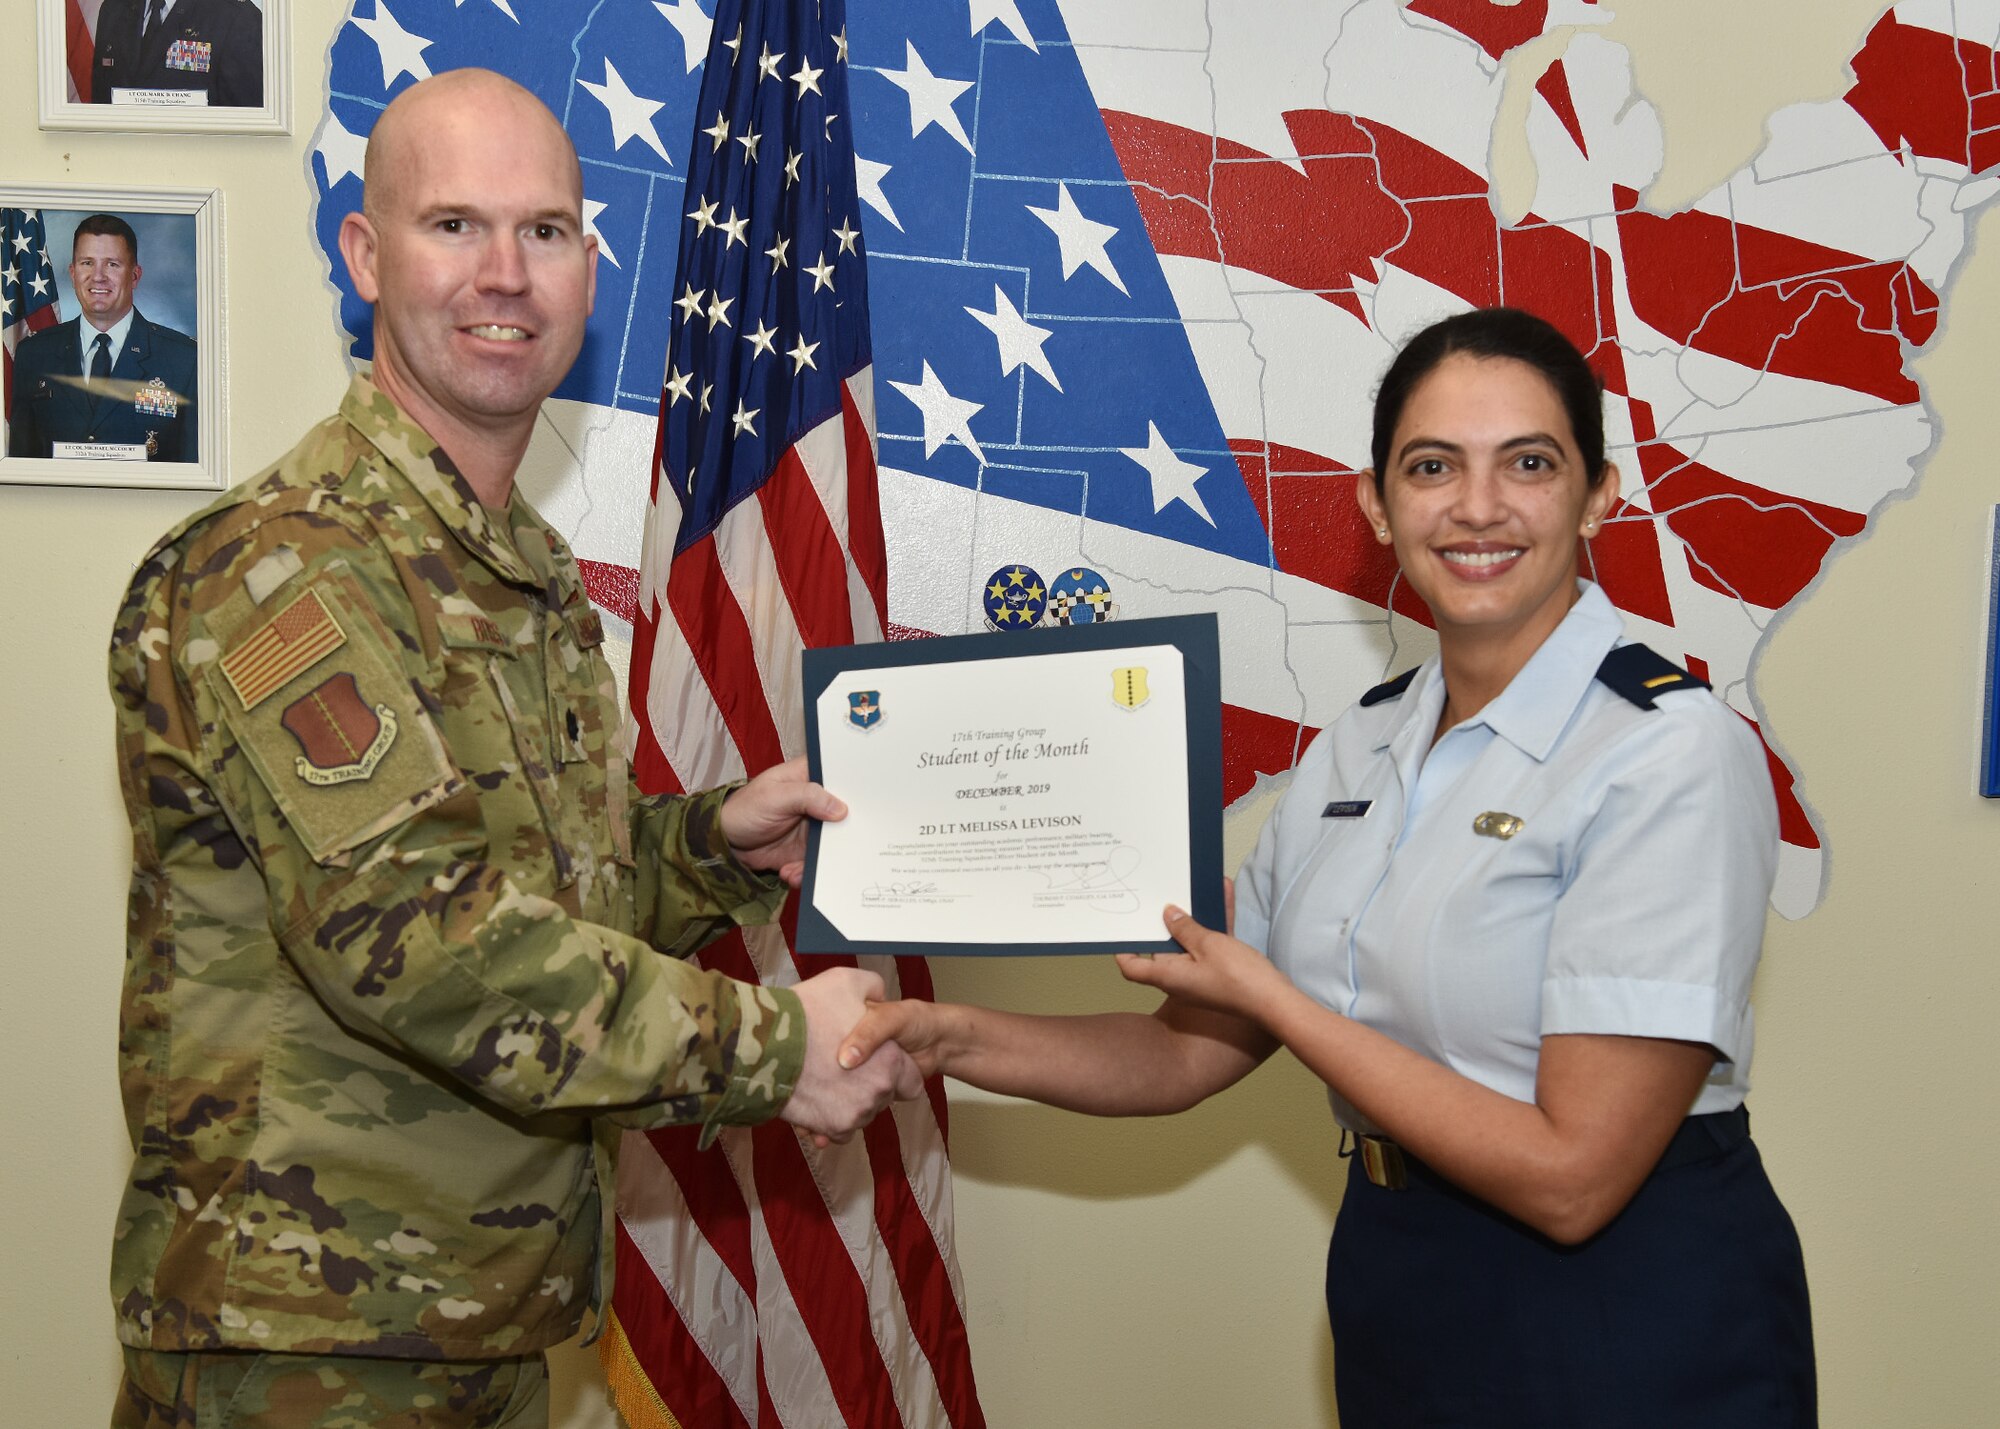 U.S. Air Force Lt. Col. Kevin Boss, 17th Training Group deputy commander, presents the 315th Training Squadron Officer Student of the Month award to 2nd Lt. Melissa Levison, 315th TRS student, at Brandenburg Hall on Goodfellow Air Force Base, Texas, Jan. 10, 2020. The 315th TRS’s vision is to develop combat-ready intelligence, surveillance and reconnaissance professionals and promote an innovative squadron culture. (U.S. Air Force photo by Staff Sgt. Chad Warren)